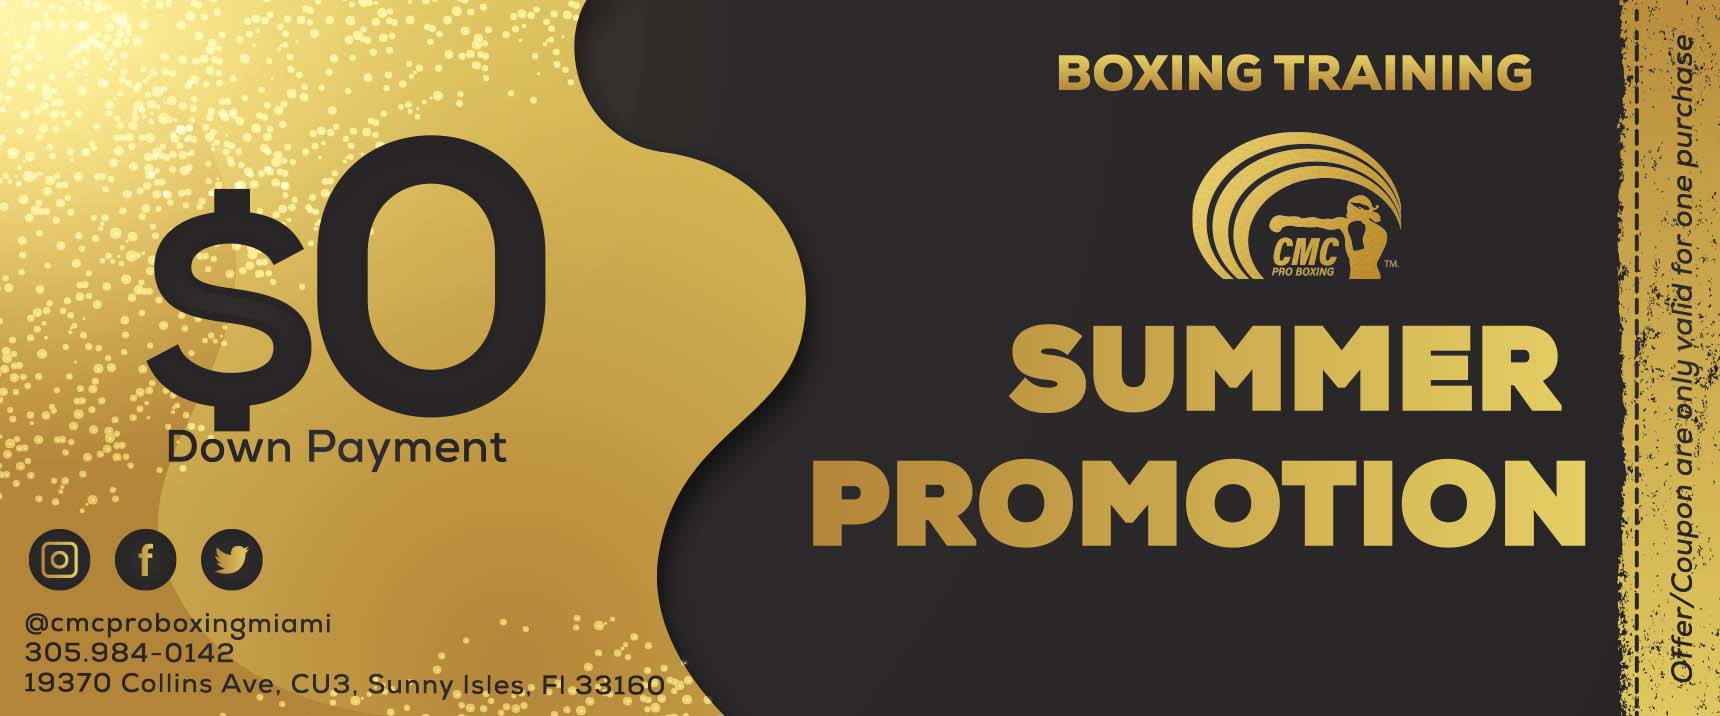 CMC PRO BOXING-SUMMER PROMOTIONS